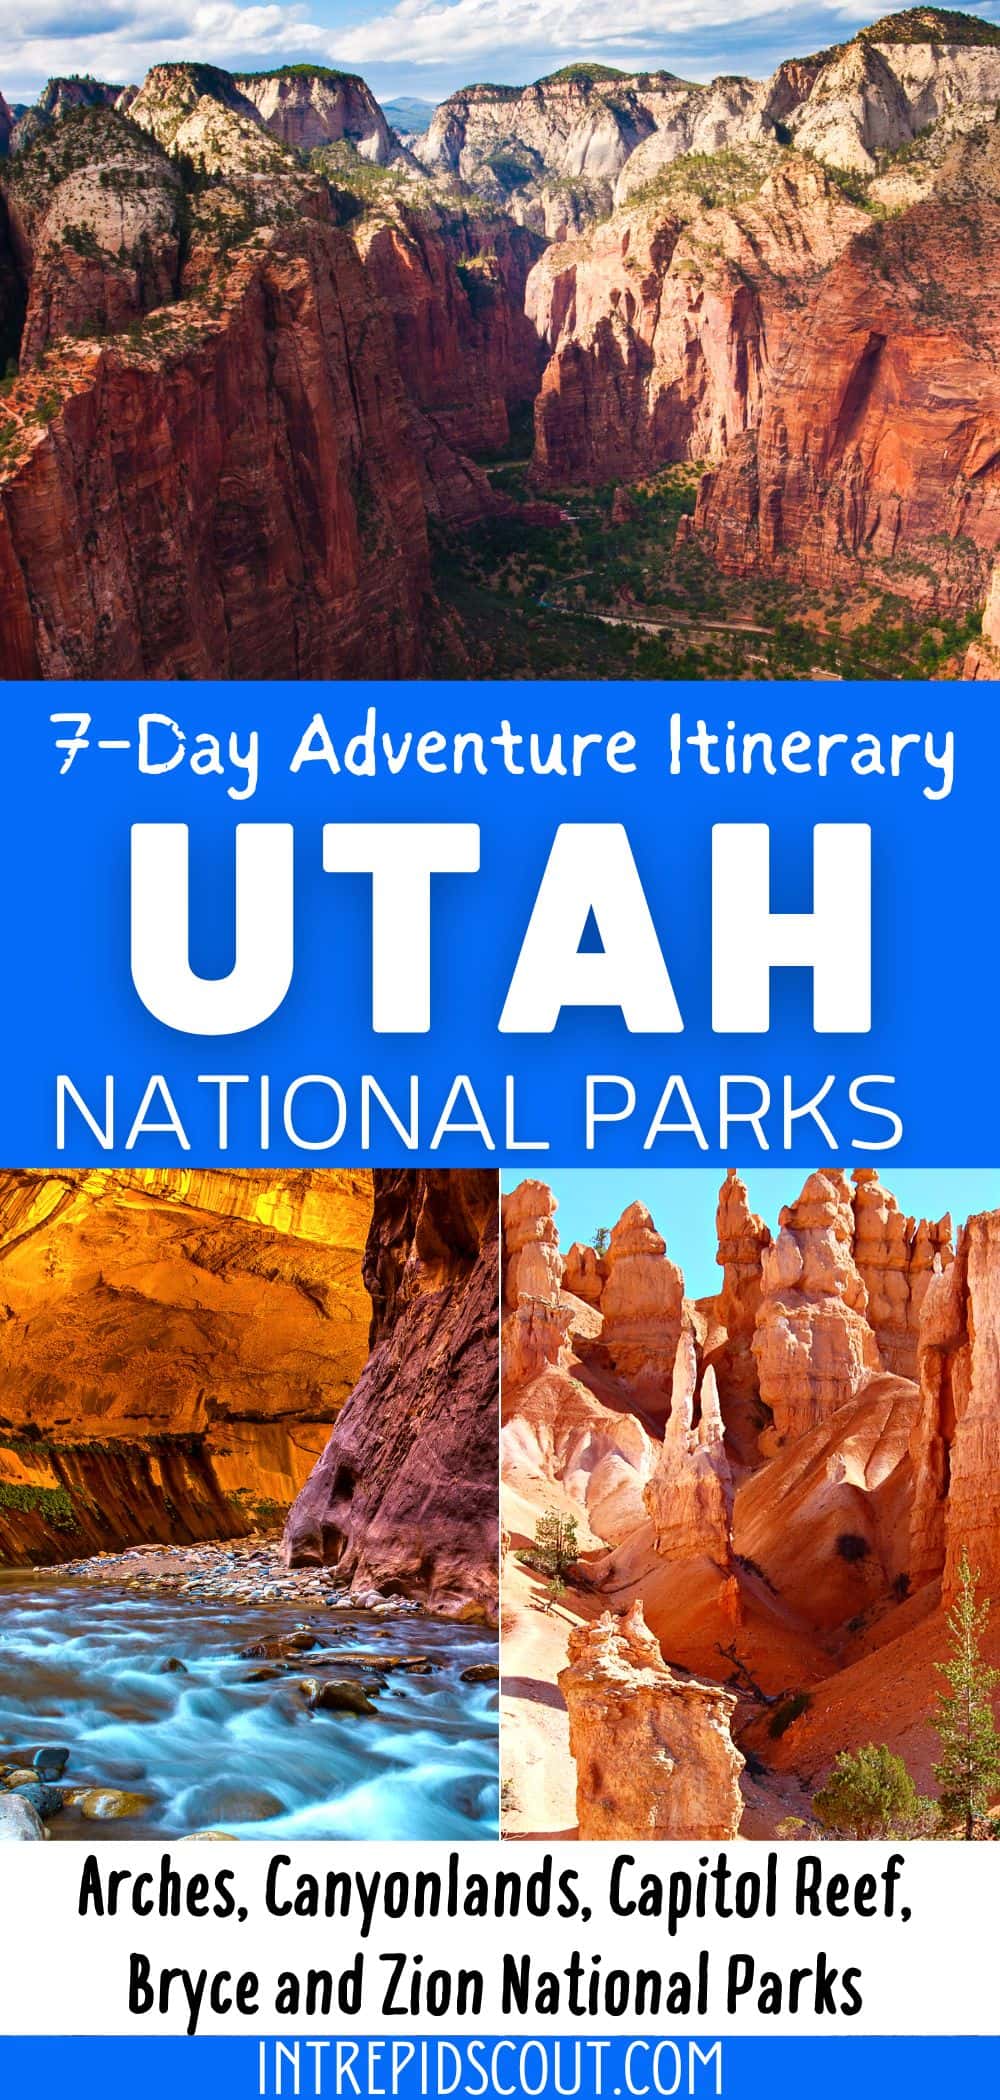 Utah National Parks 7-Day Adventure itinerary